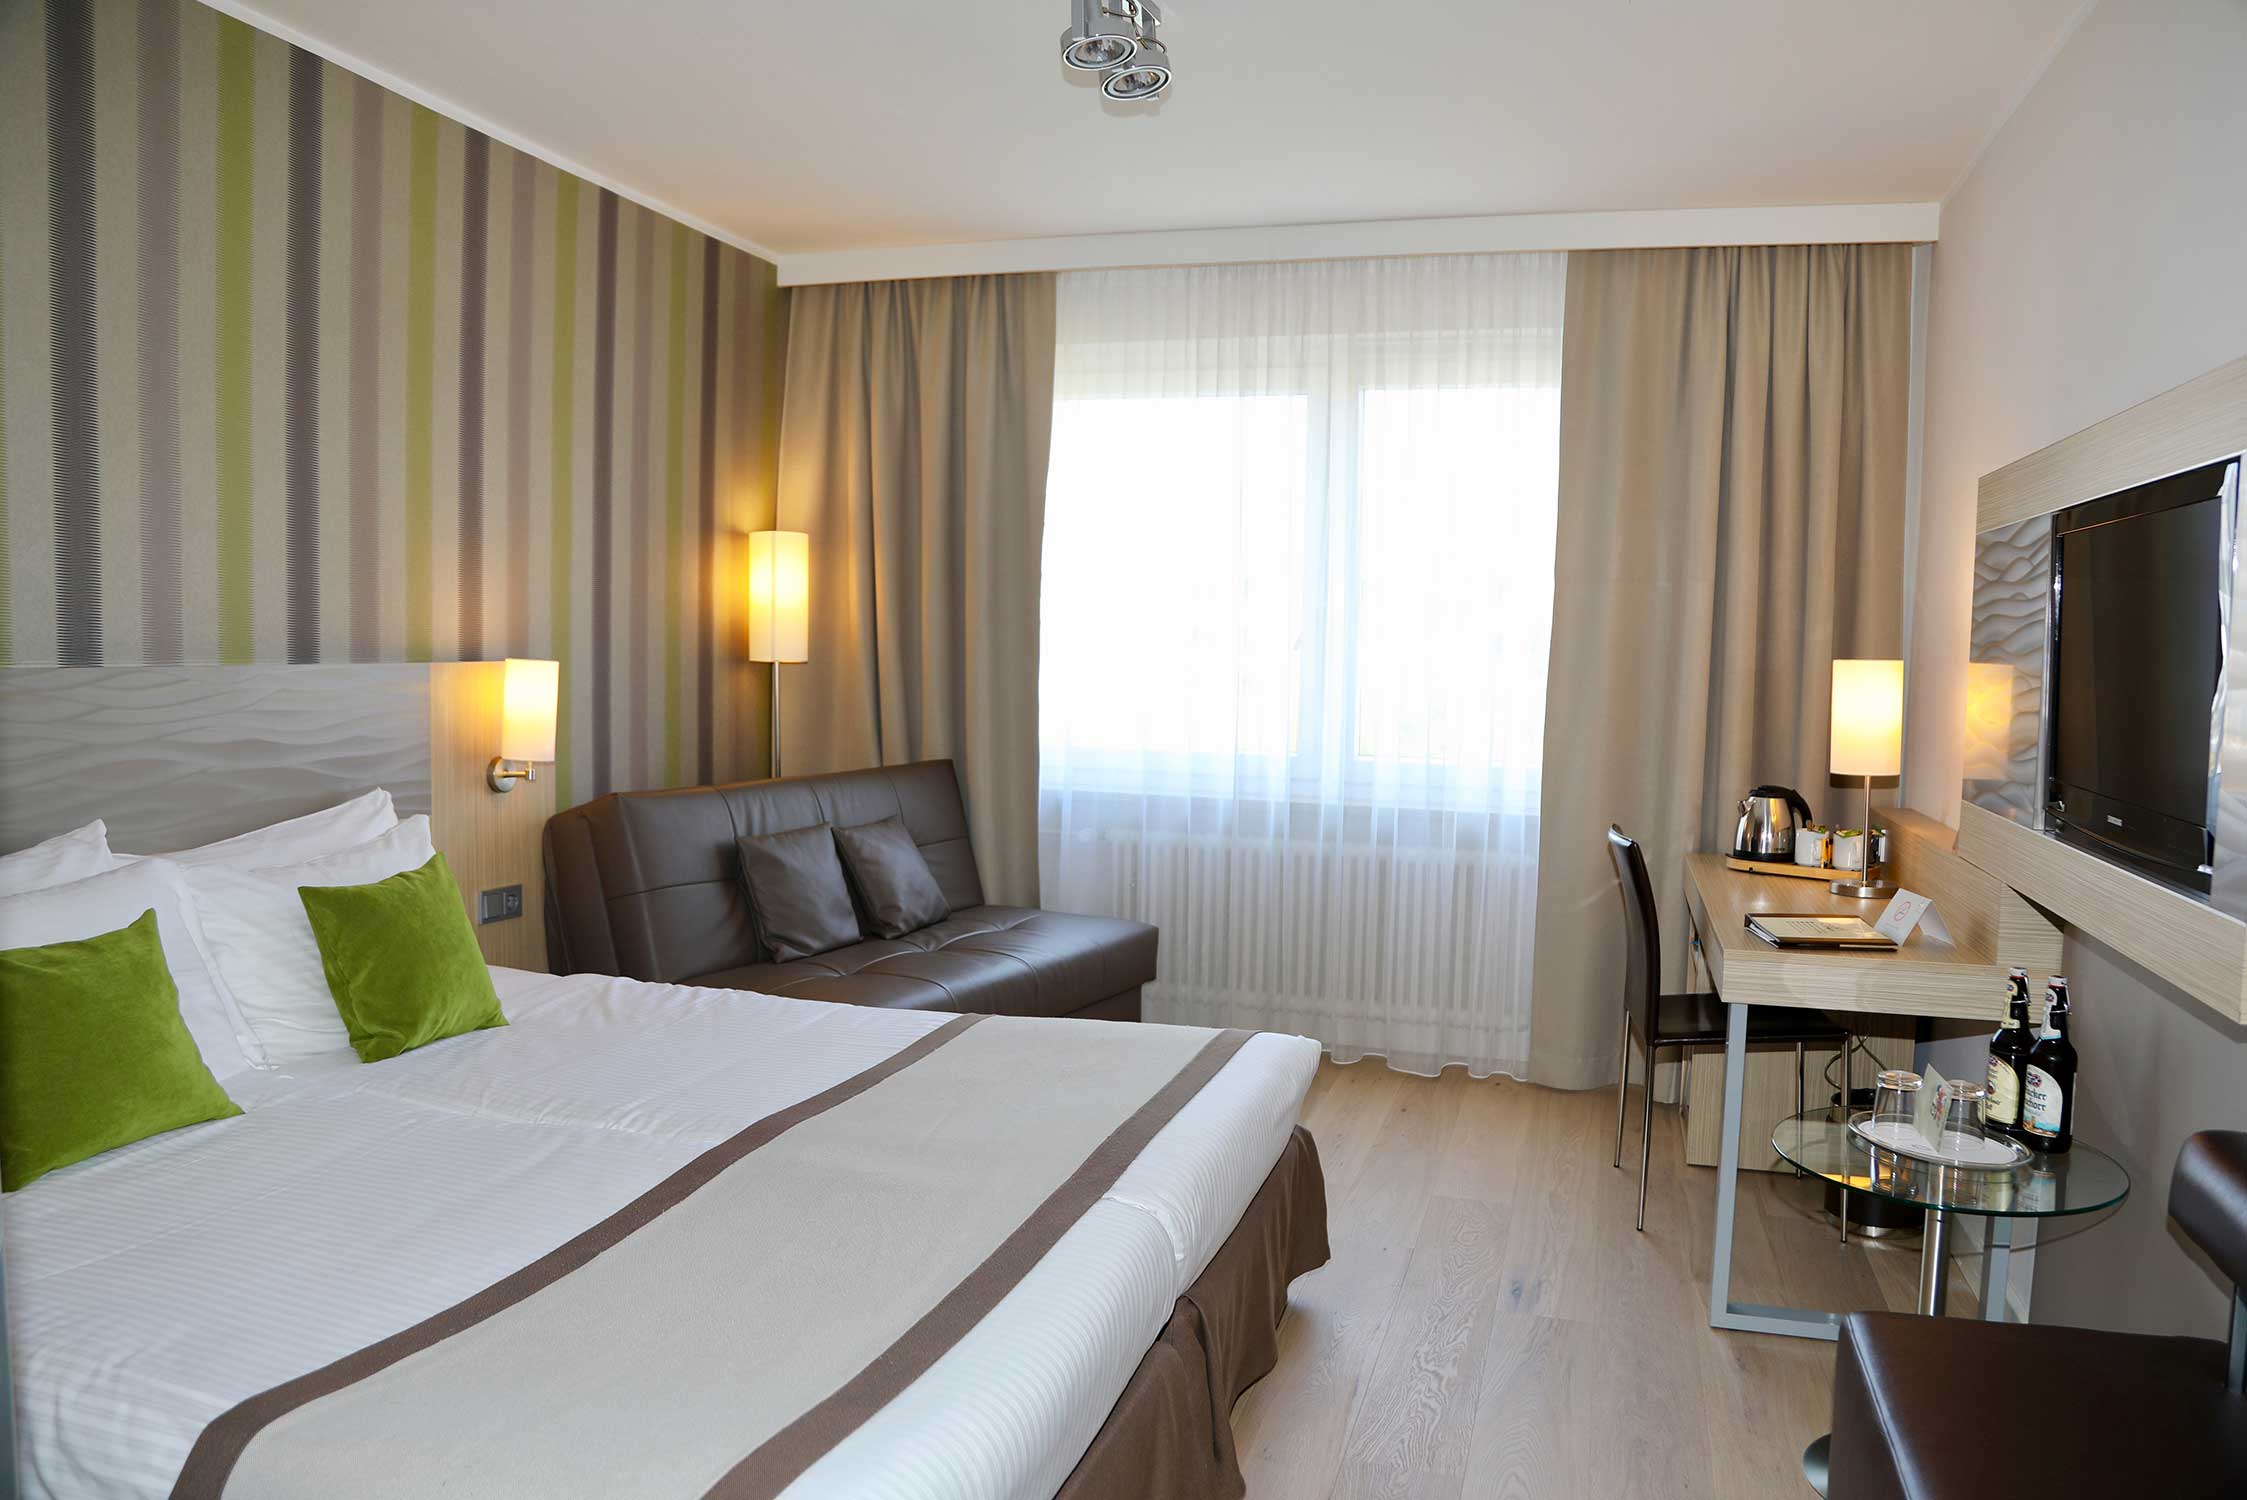 Hotel New Orly, 3 bed room / family room view